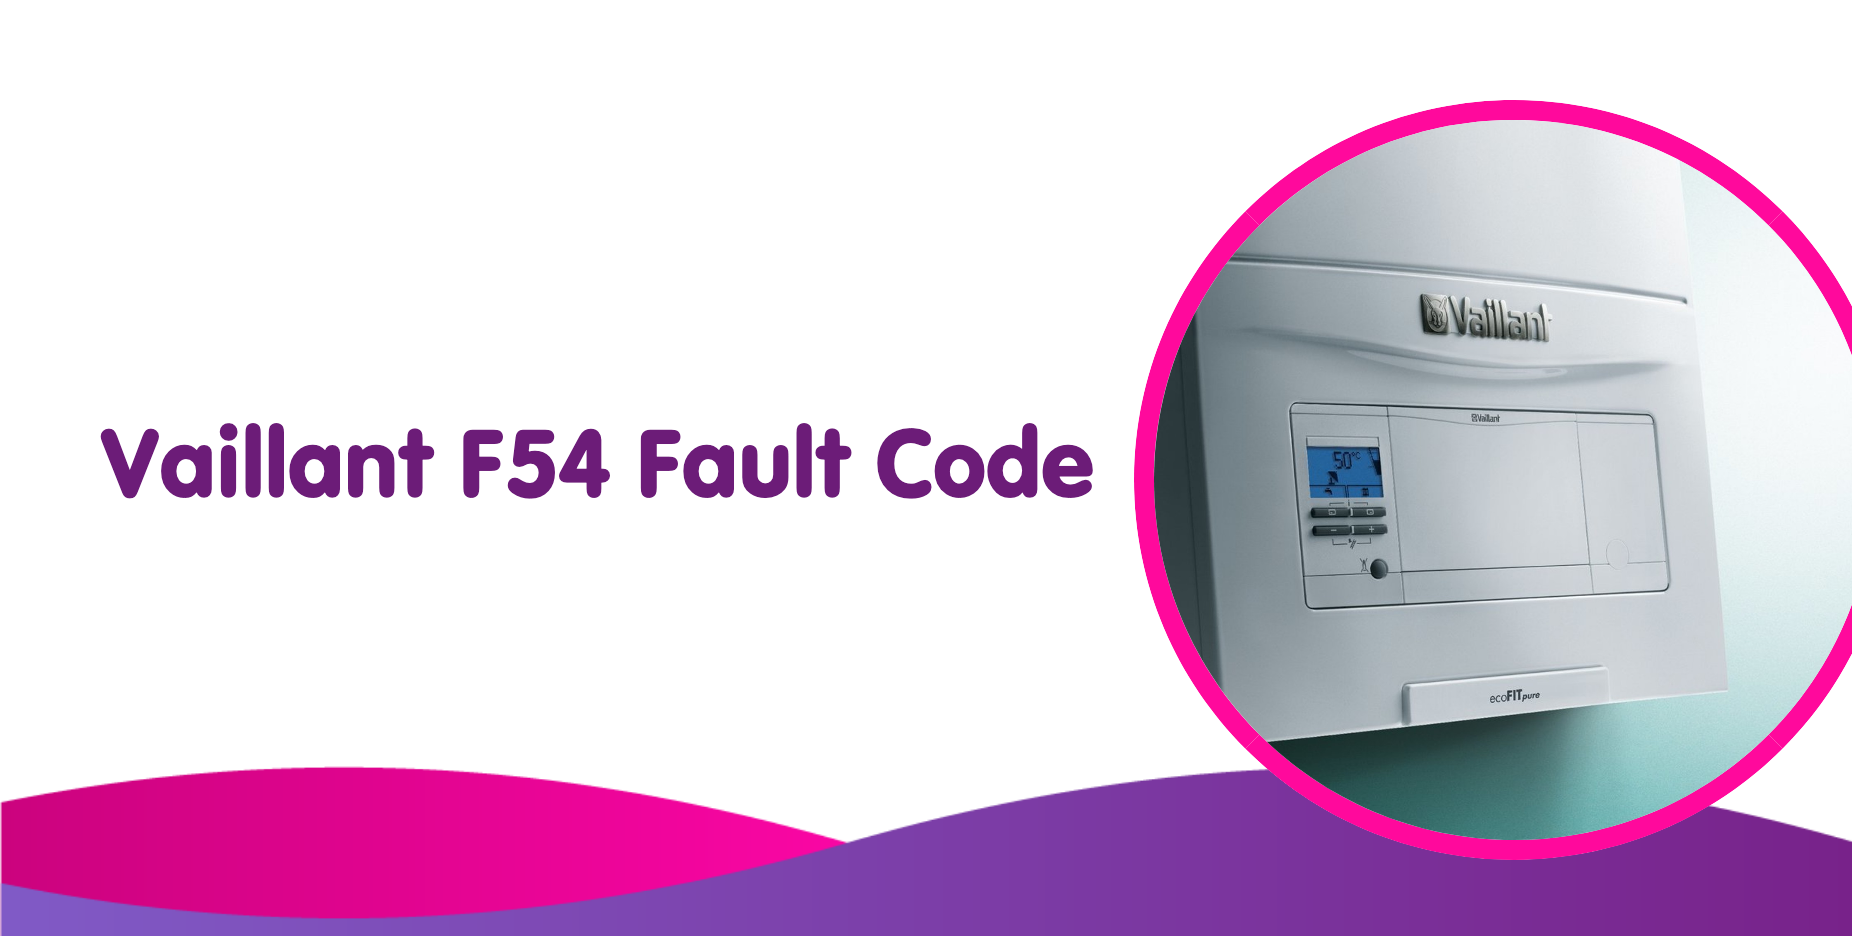 F54 Vaillant Fault Code Meaning, Causes & How To Fix It